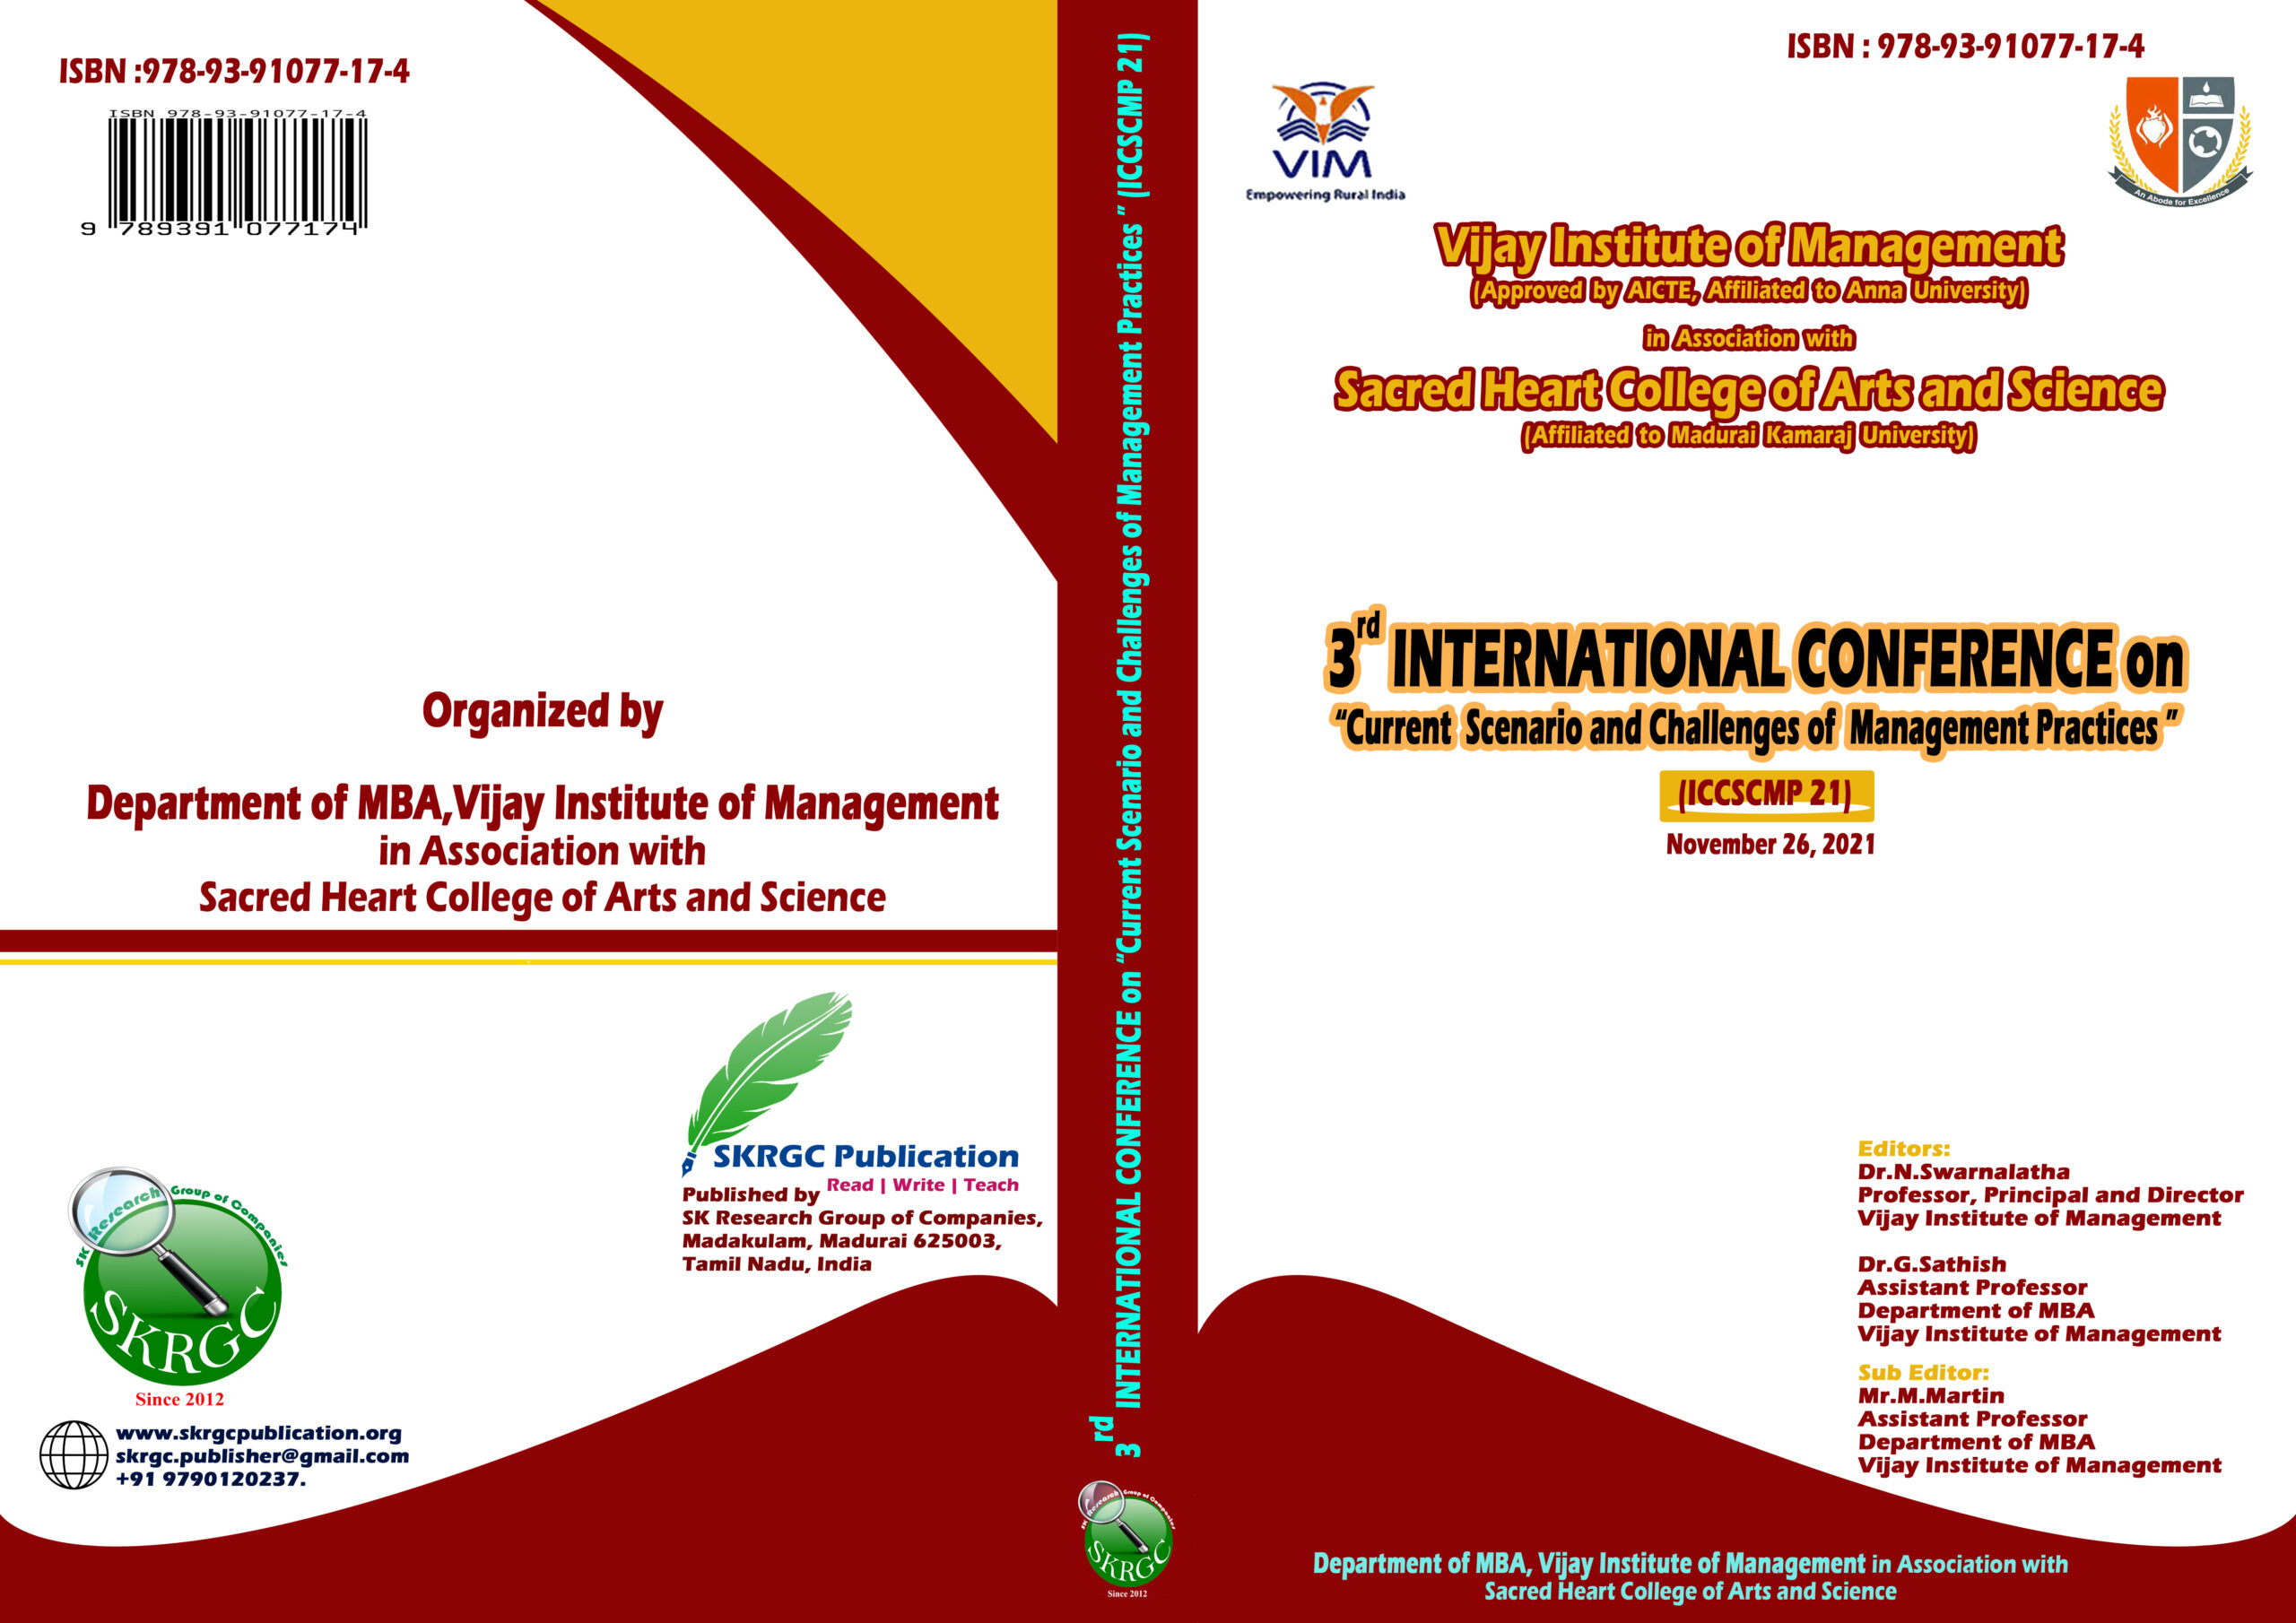 3rd INTERNATIONAL CONFERENCE on Current Scenario and Challenges of Management Practices VIJAY INSTITUTE OF MANAGEMENT Approved by AICTE,Affiliated to Anna University in Association with SACRED HEART COLLEGE OF ARTS AND SCIENCE Affiliated to Madurai Kamaraj University